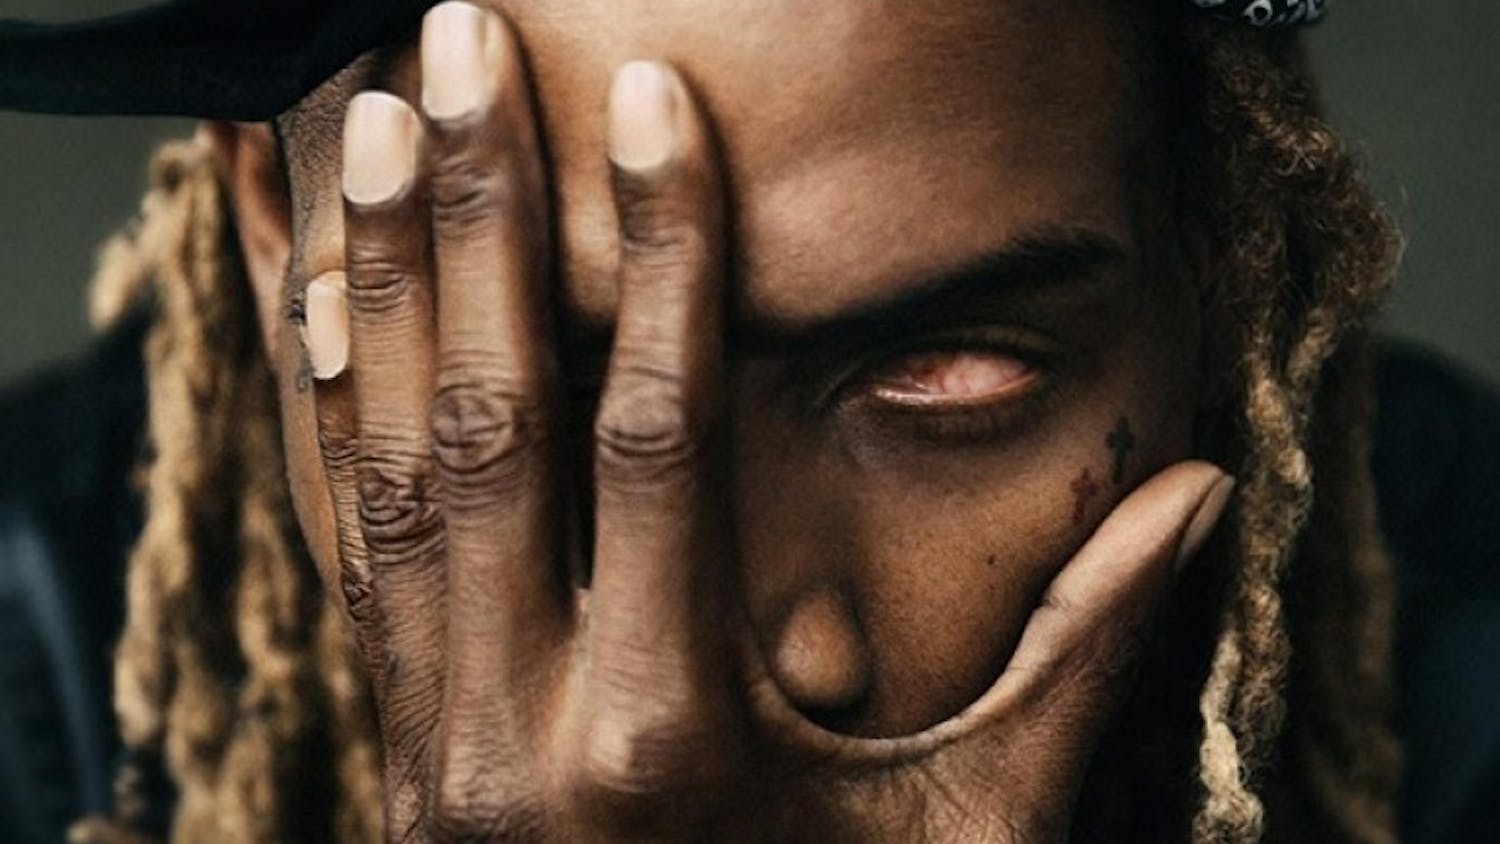 Fetty Wap's self-titled album did not live up to the hype that his first three hits created.